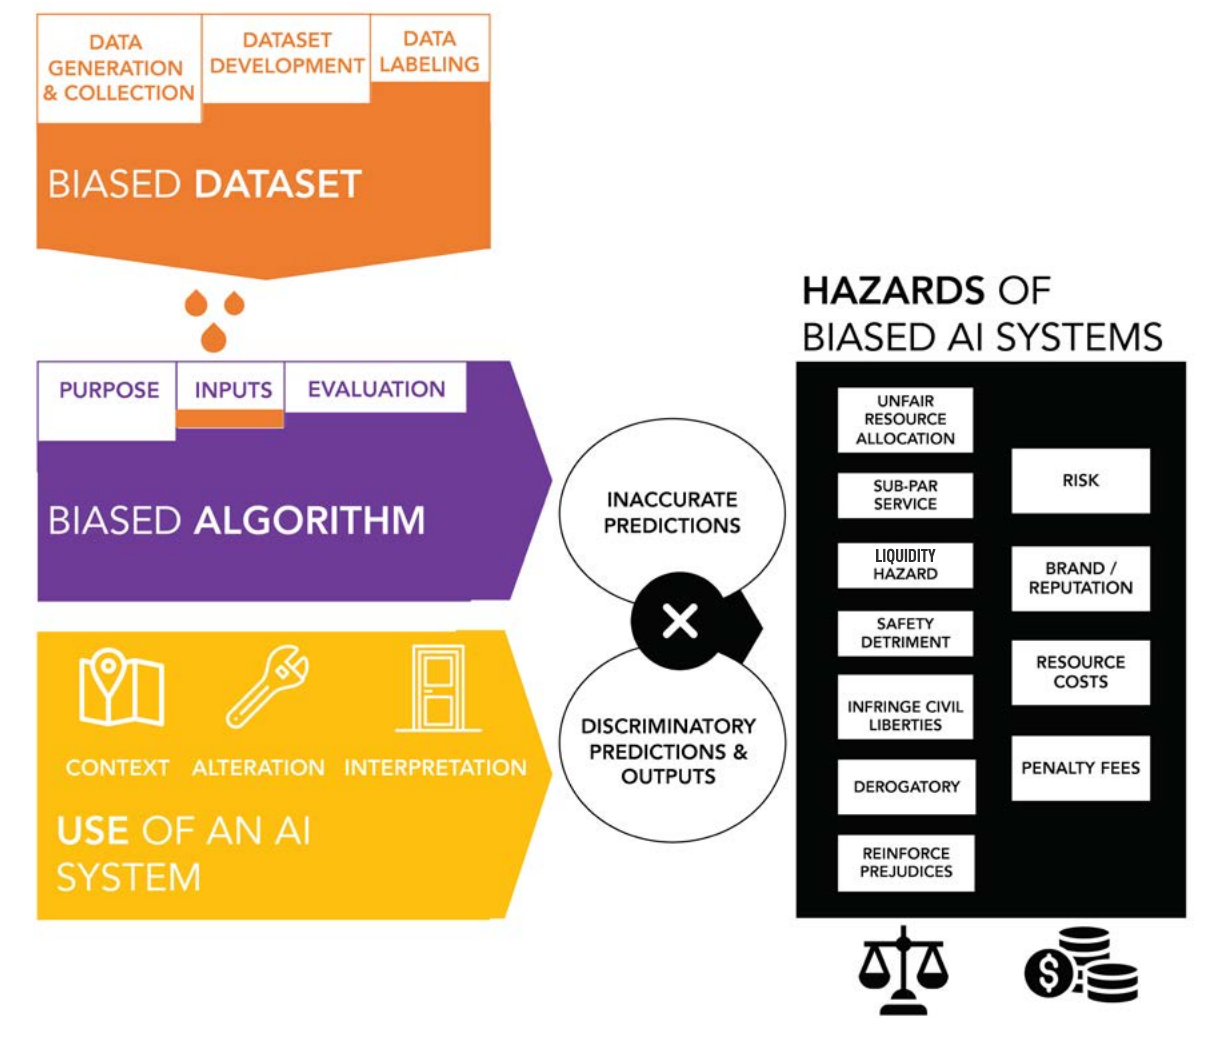 Chart of hazards of biased AI systems